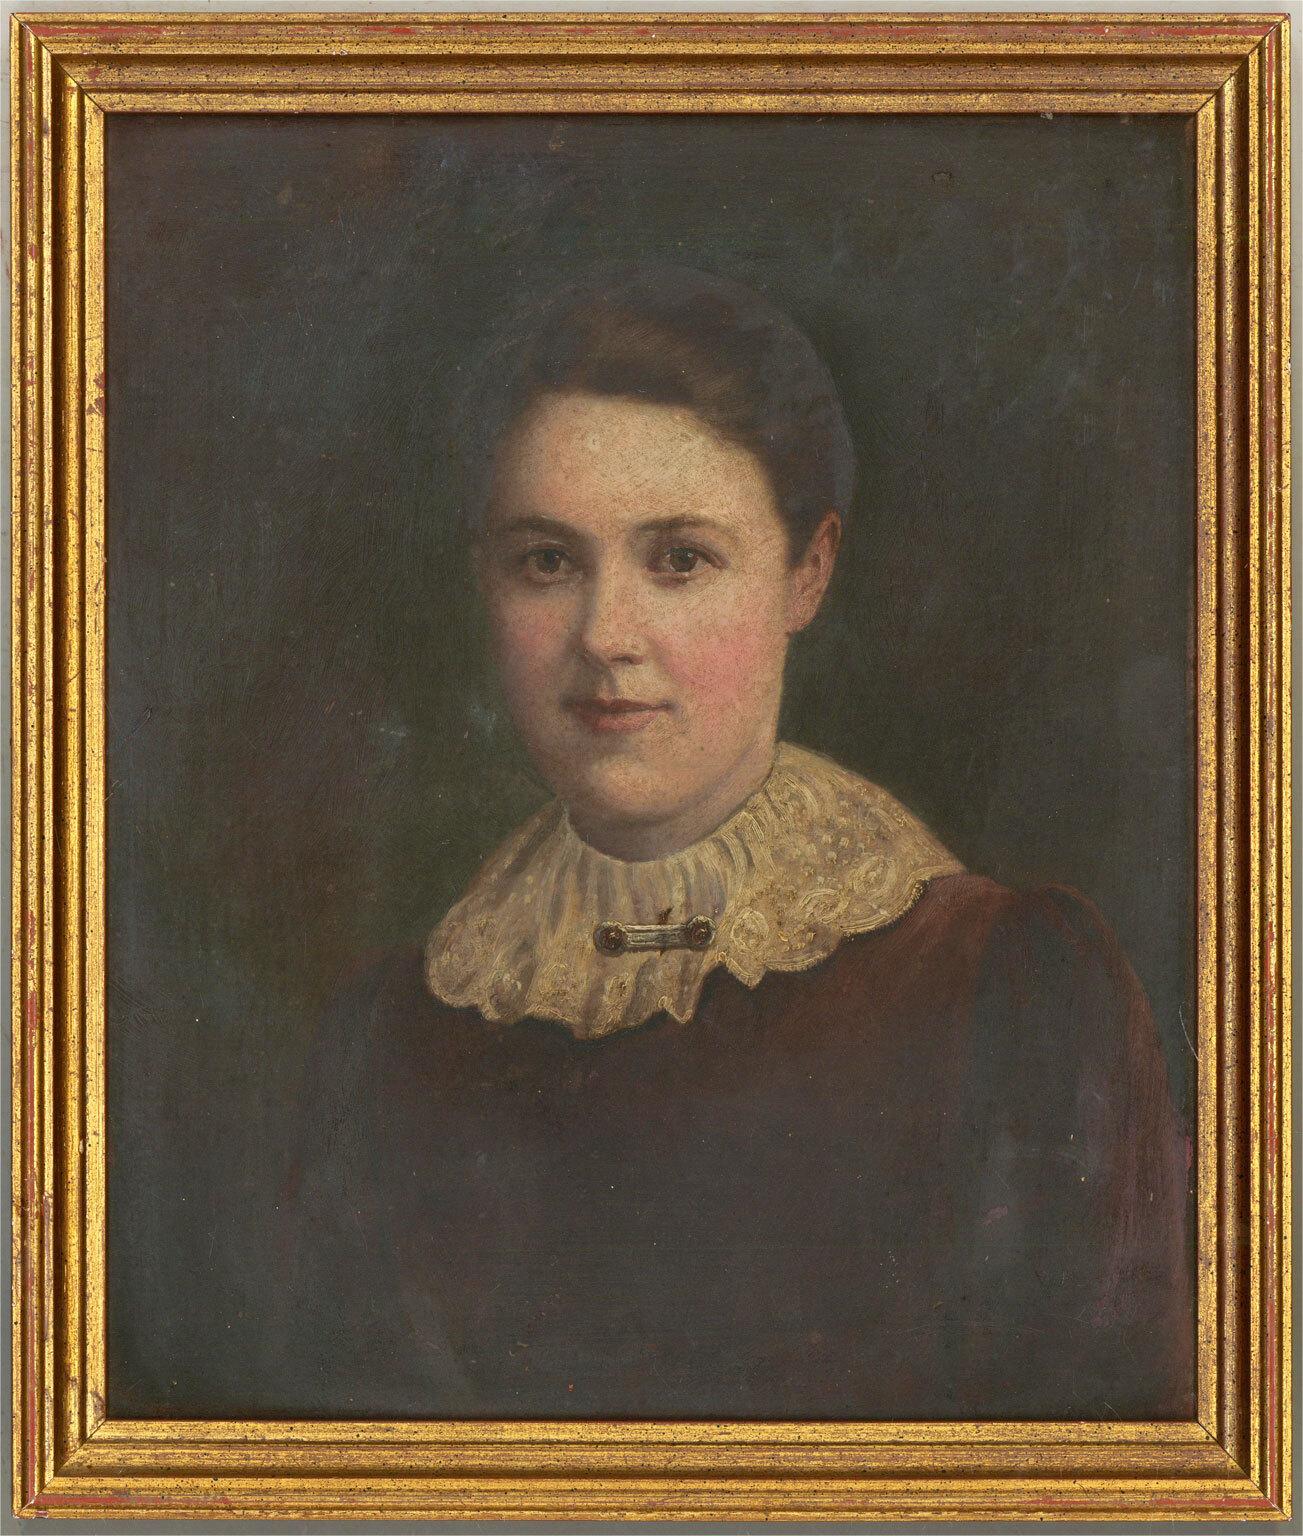 Unknown Portrait Painting - Early 20th Century Oil - Edwardian Woman